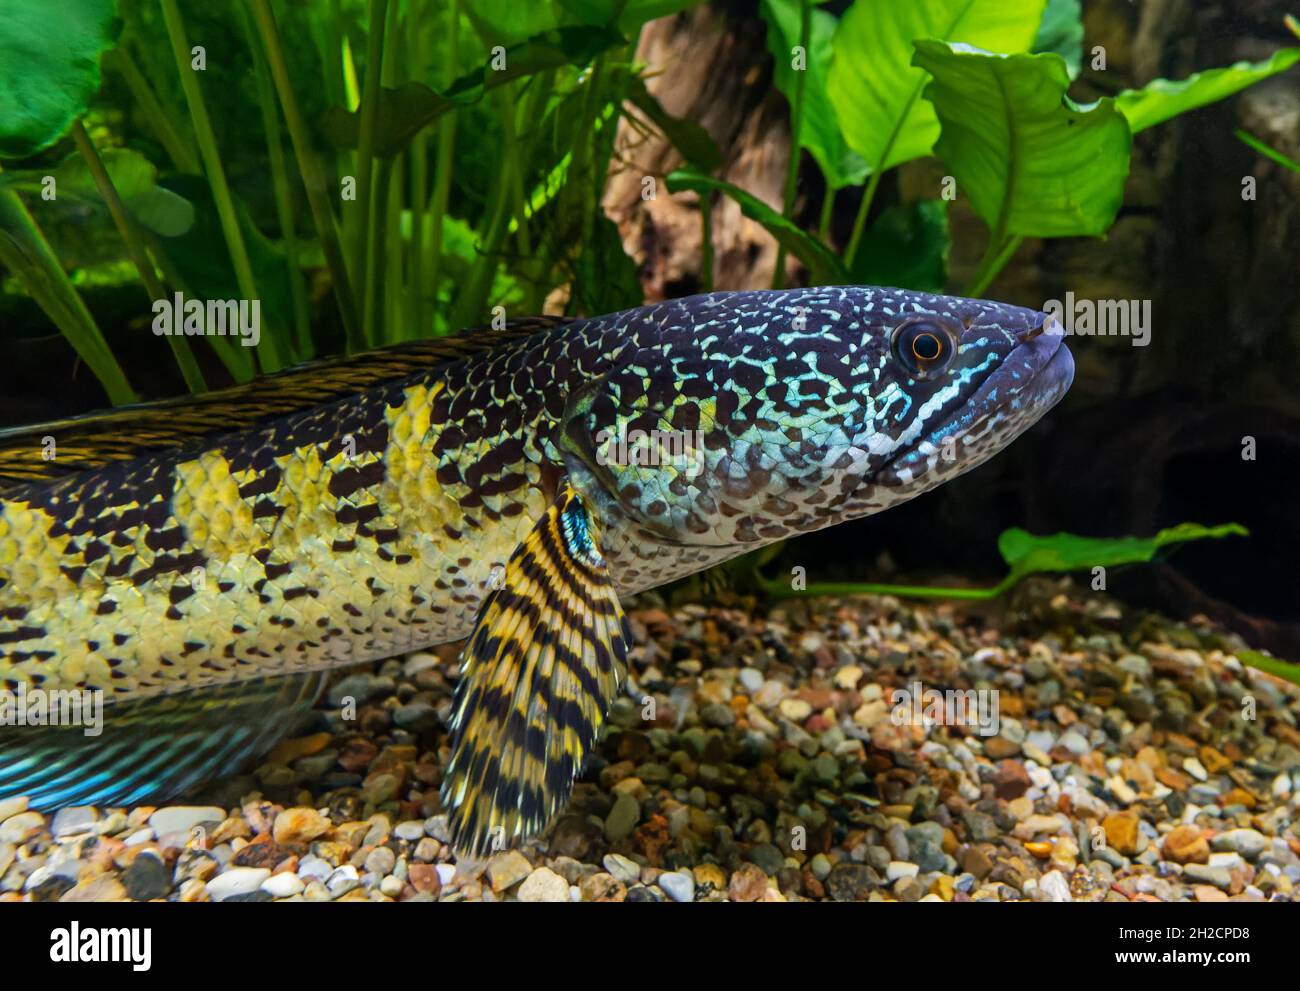 Close-up view of an Orange spotted snakehead (Channa aurantimaculata) Stock Photo